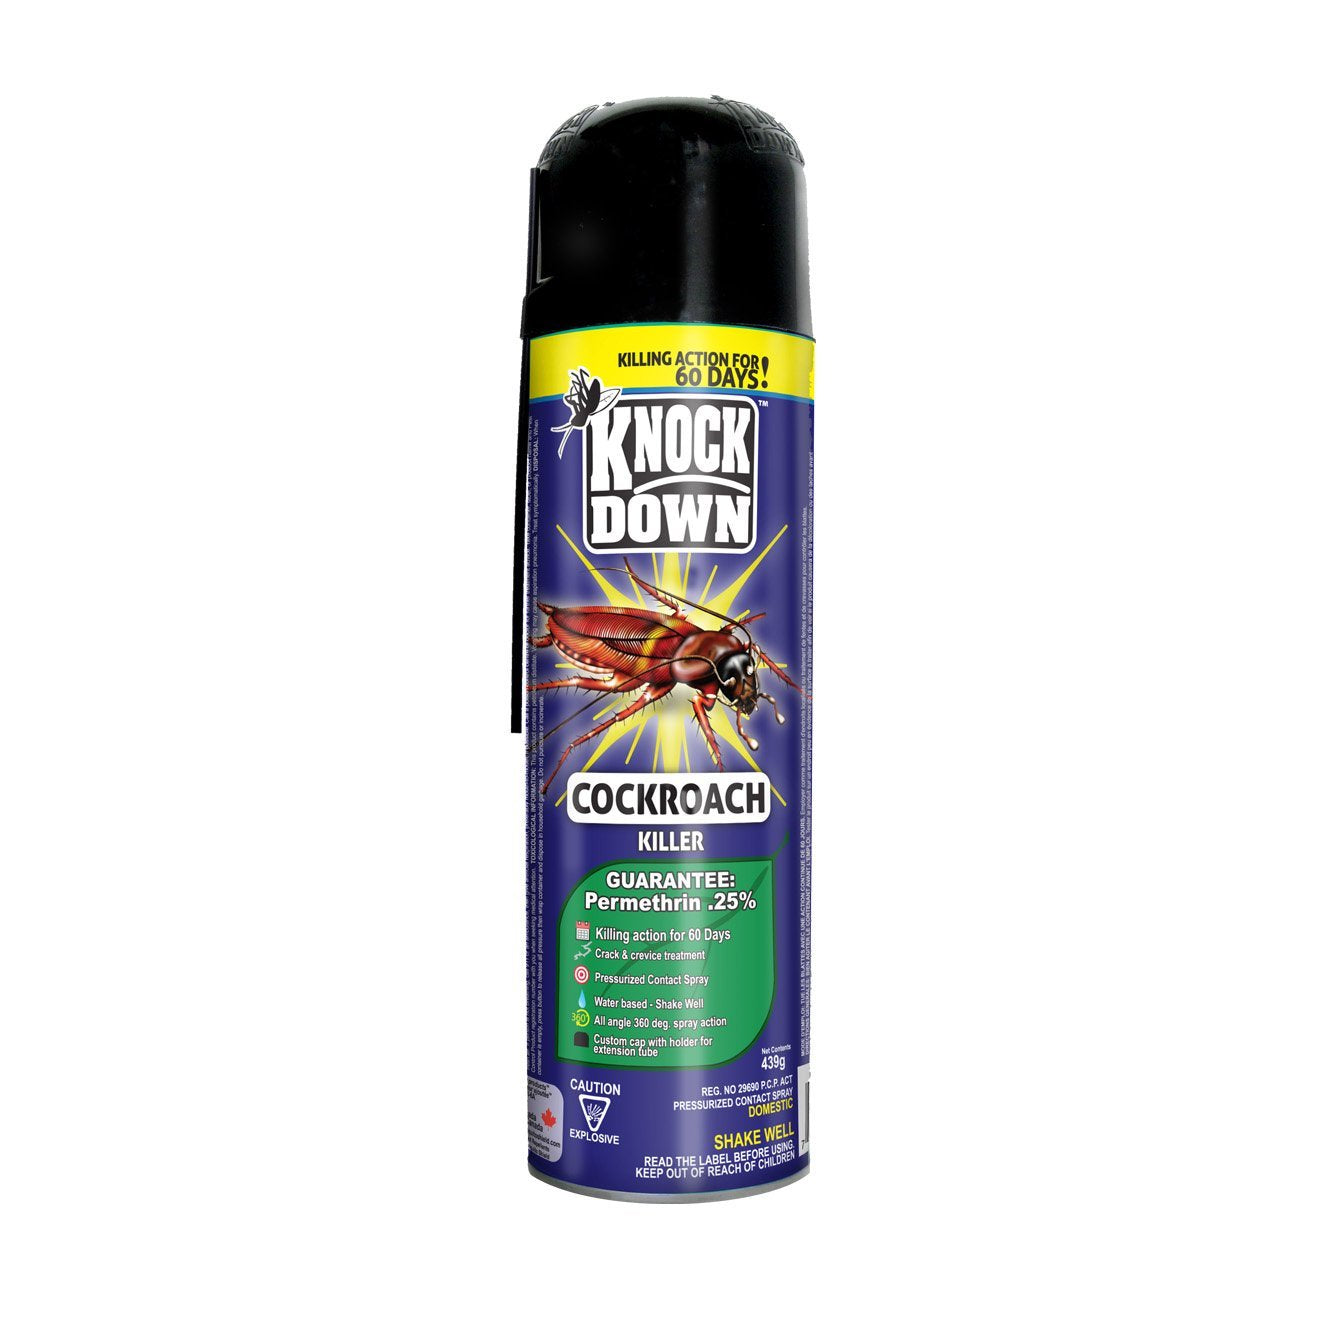 Buy Cockroach Killer, 439g Online With Canadian Pricing - Urban Nature Store